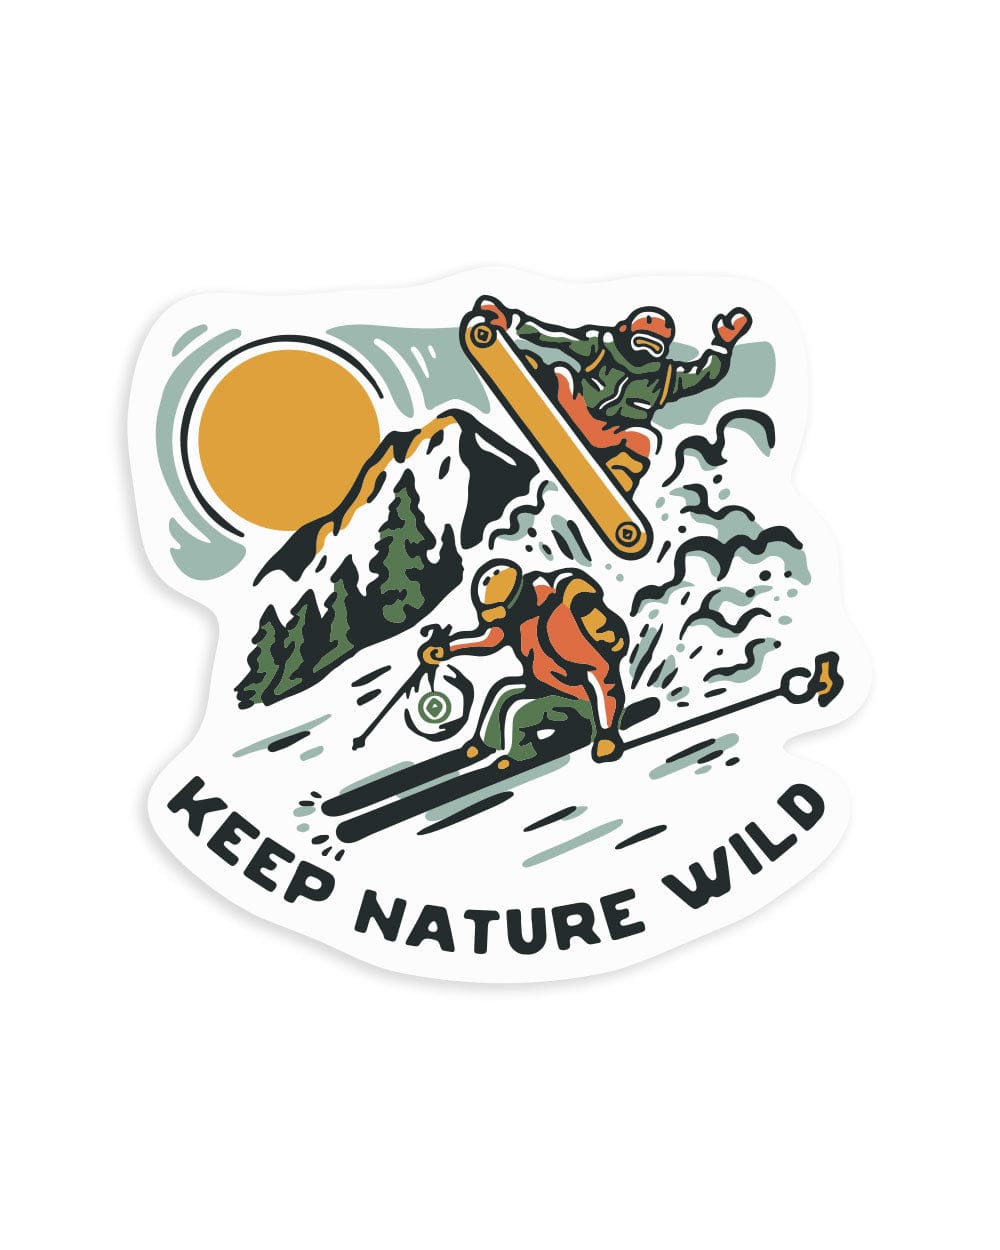 100 Pcs Outdoor Camping Stickers Travel Hiking Adventure Stickers  Wilderness Nature Stickers Pack Waterproof Vinyl Stickers Decals for Water  Bottle